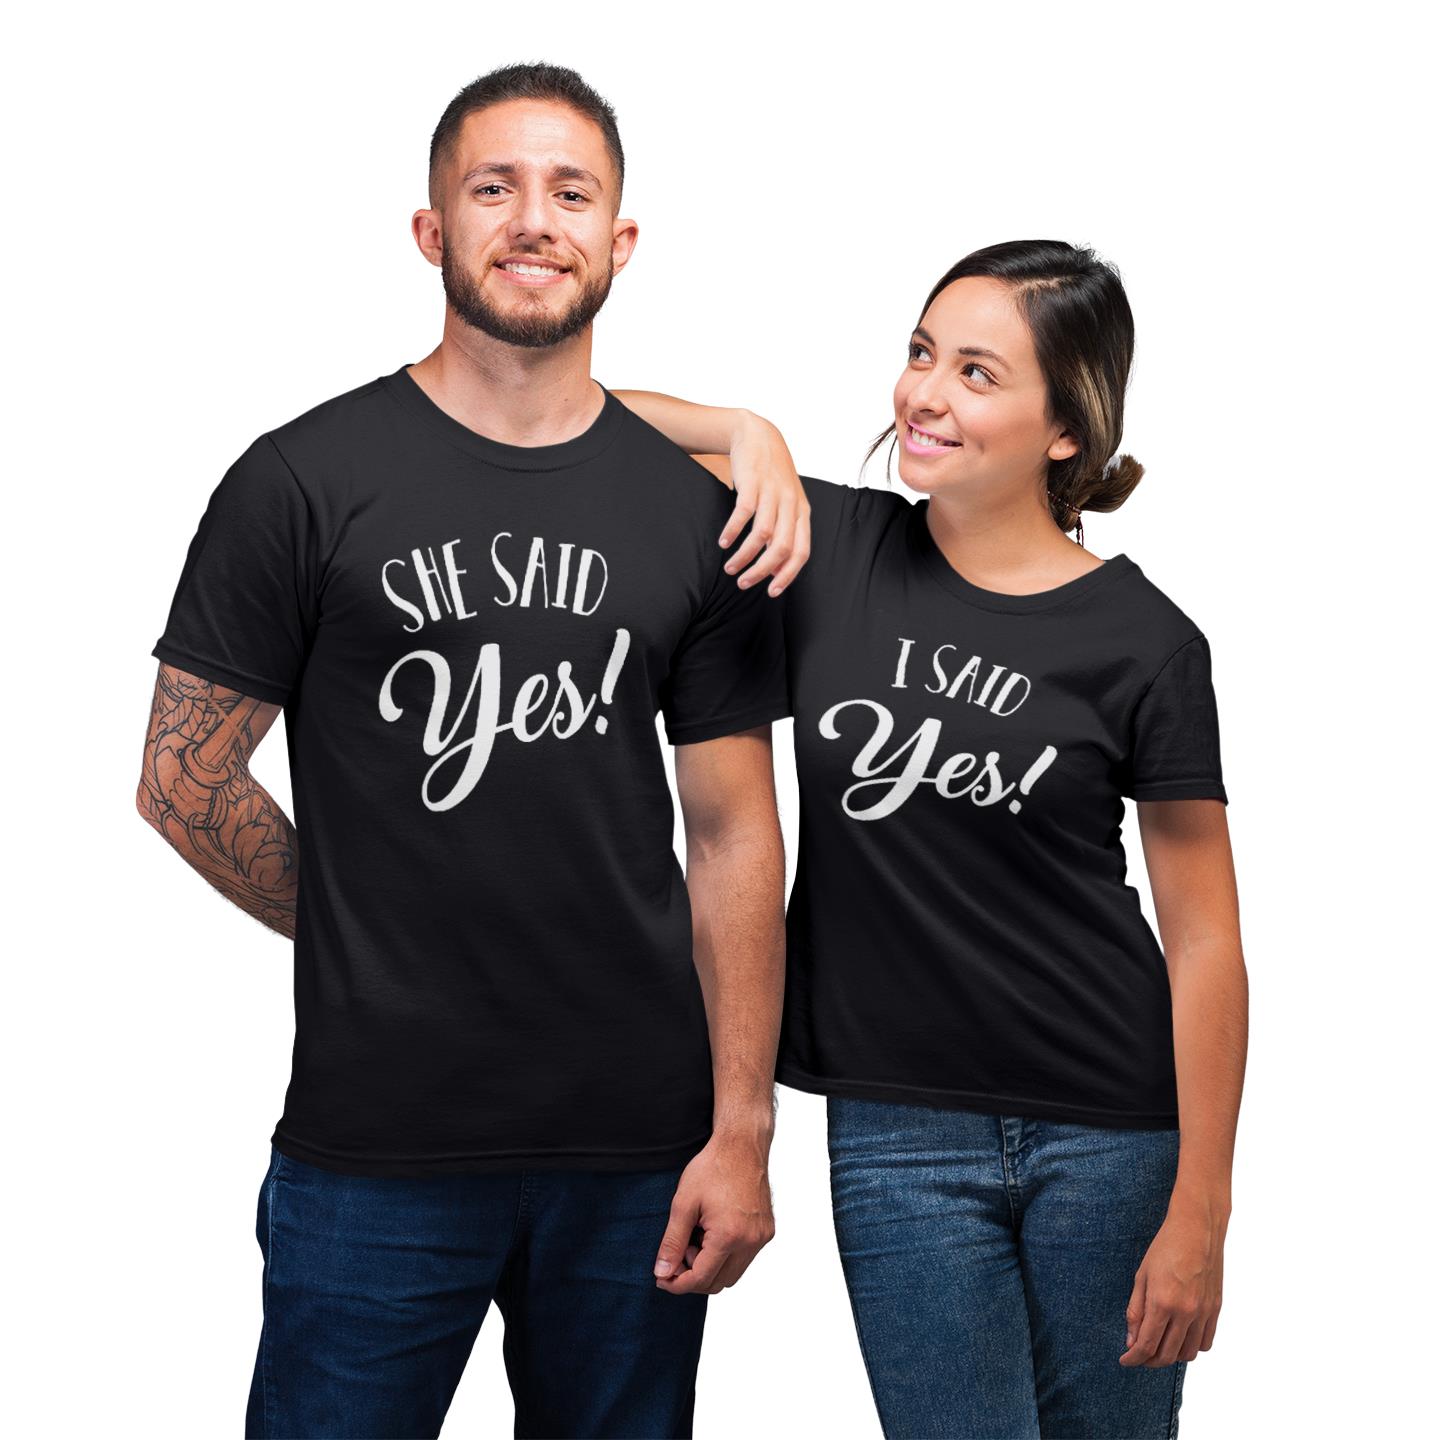 She Said Yes Funny Shirt For Couple Matching His And Hers T-shirt